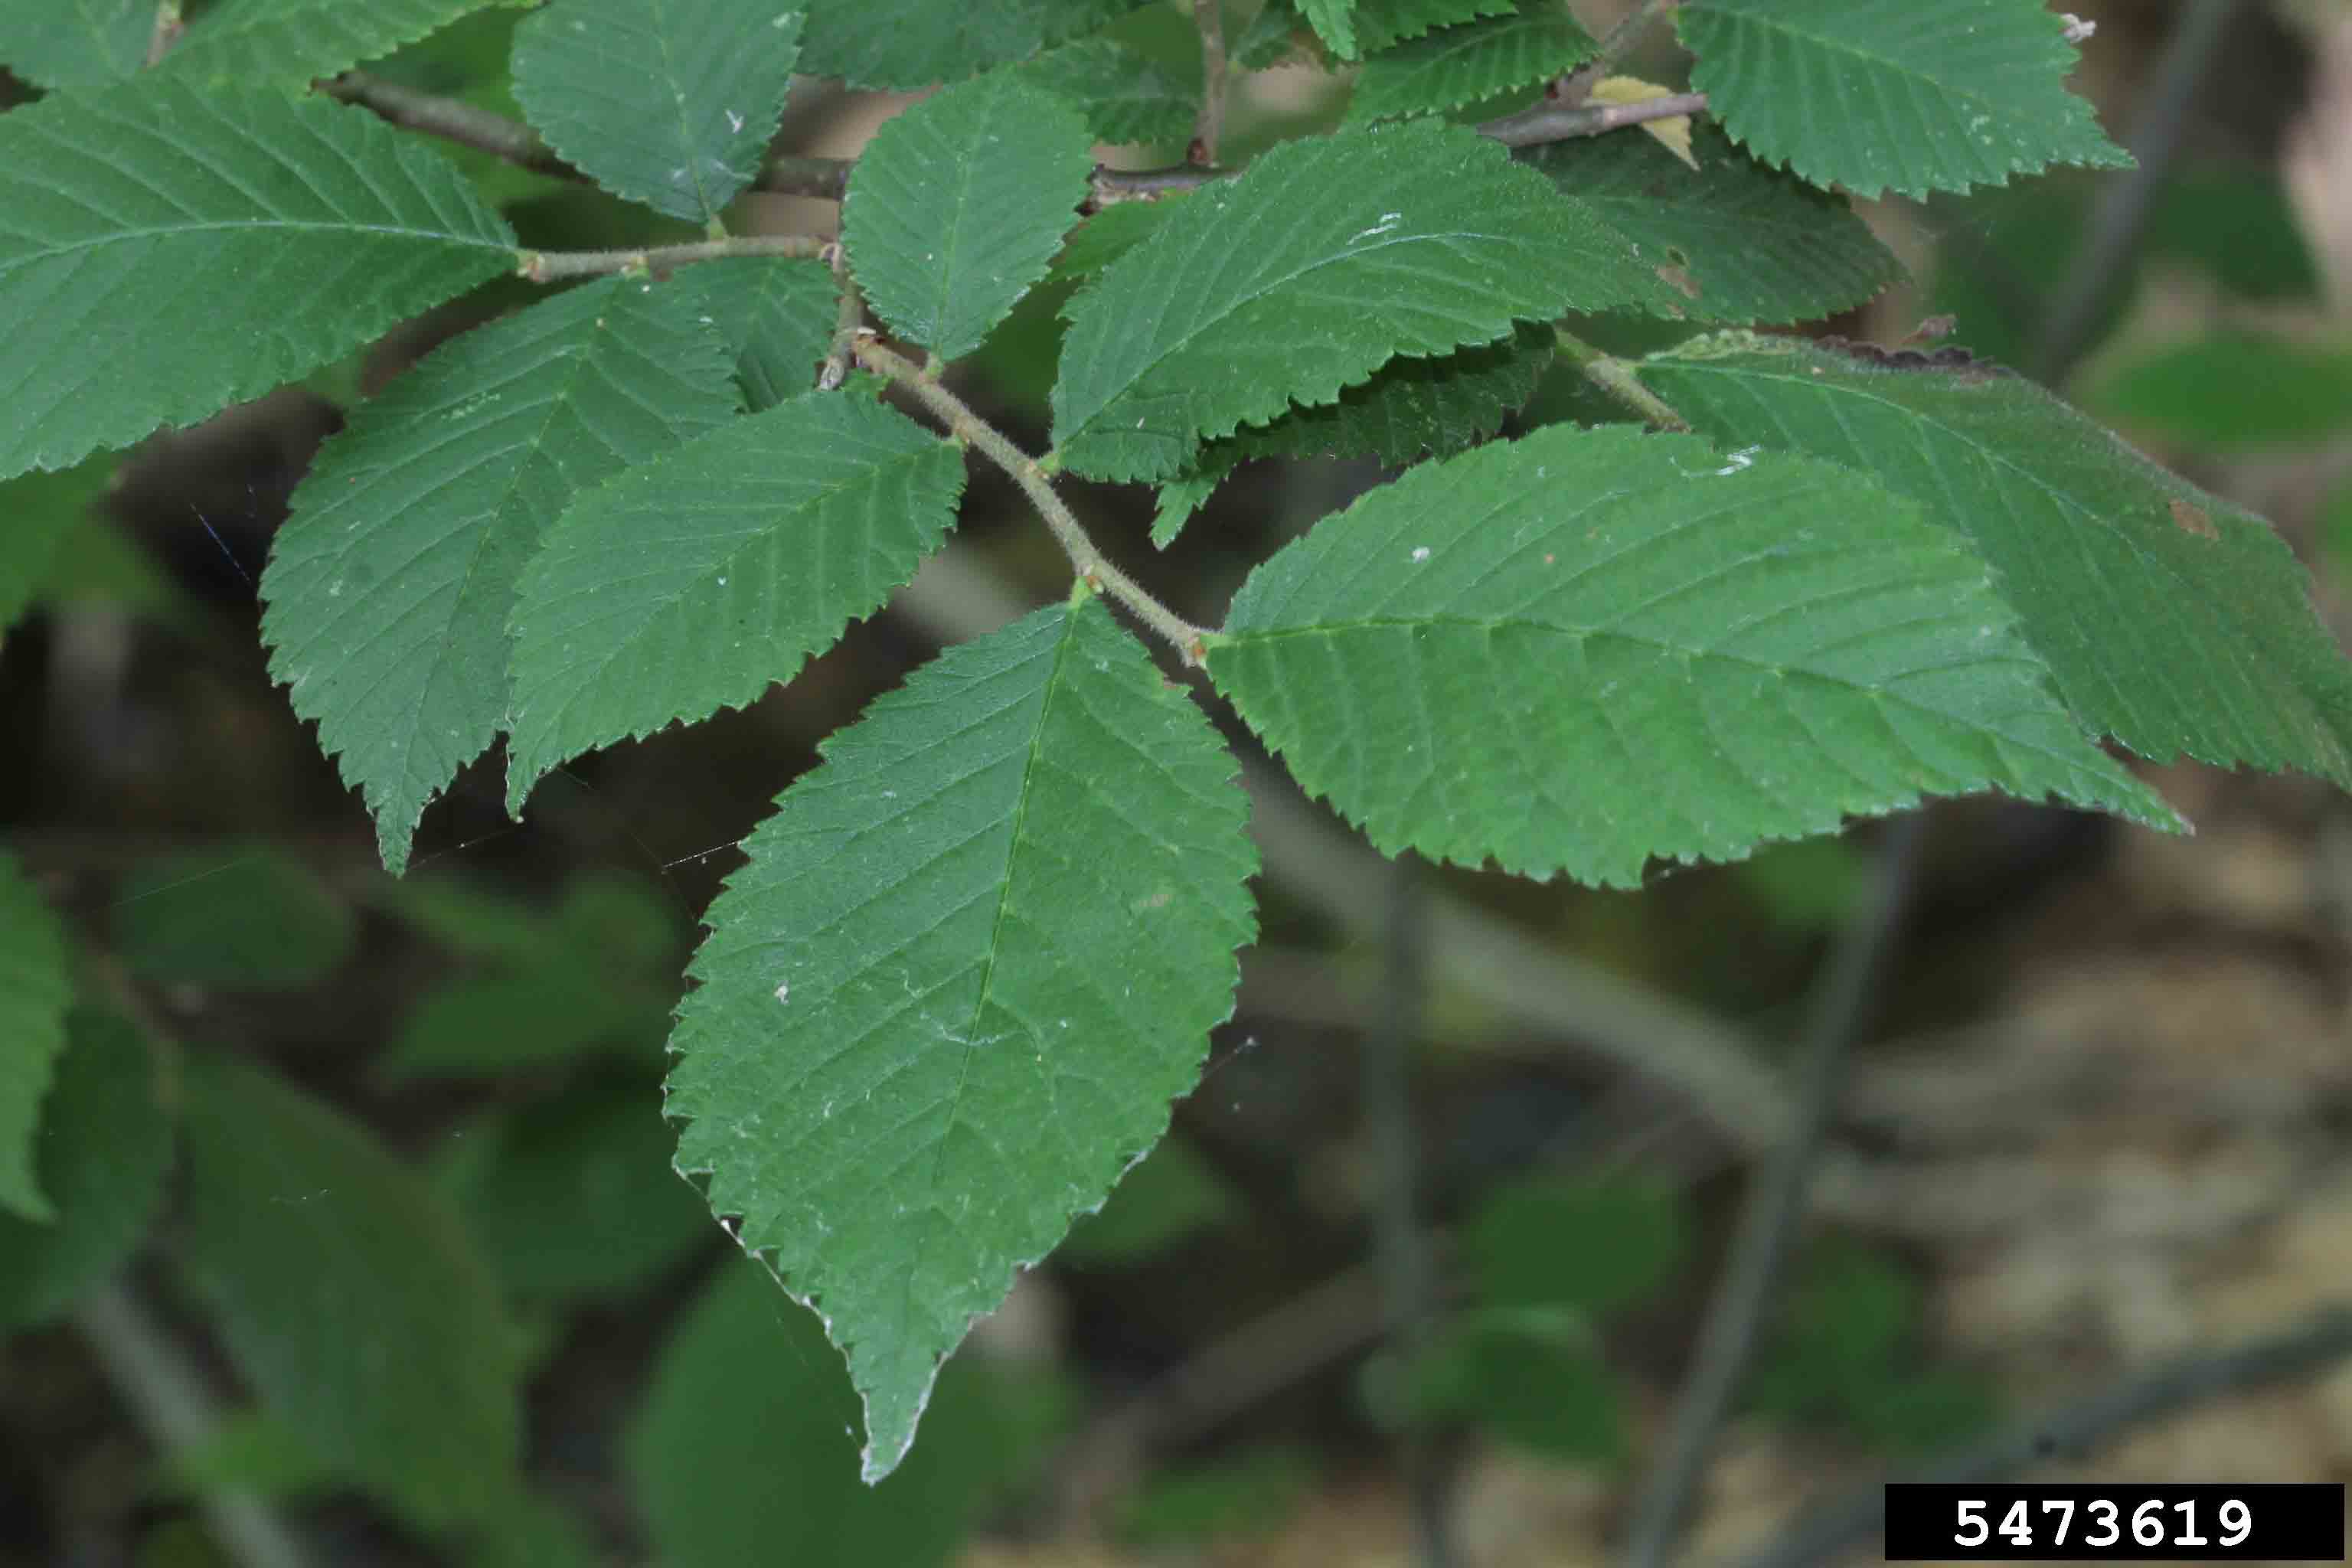 Slippery elm leaves, showing rough surface and doubly toothed margins